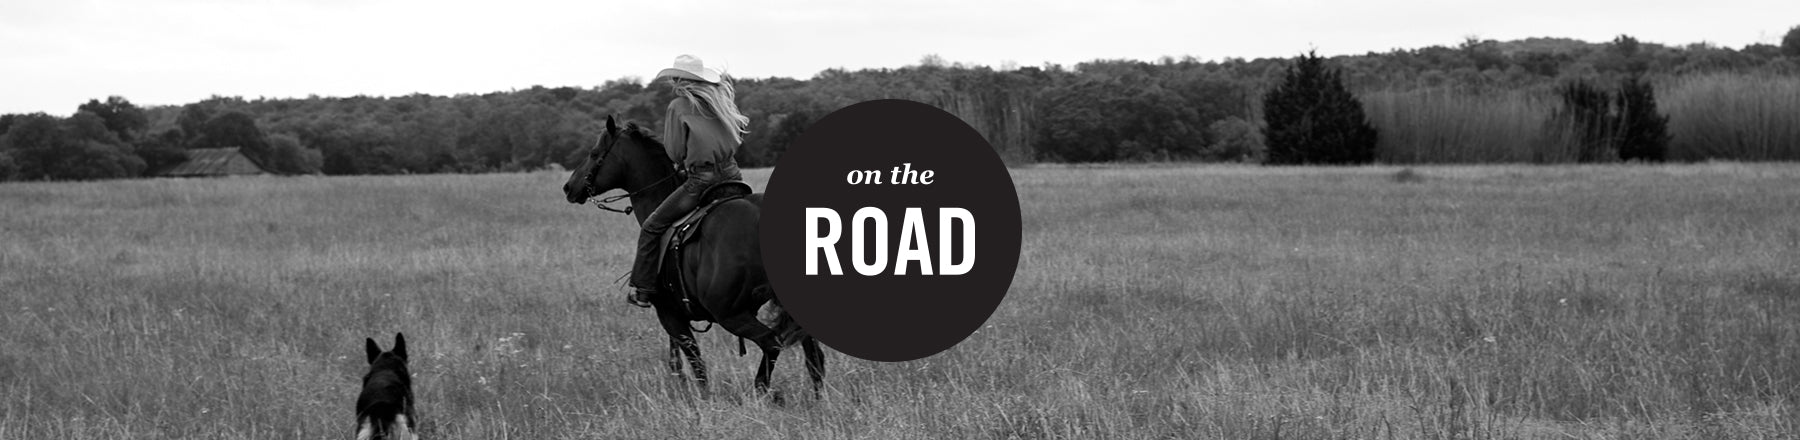 The Blog : On the Road